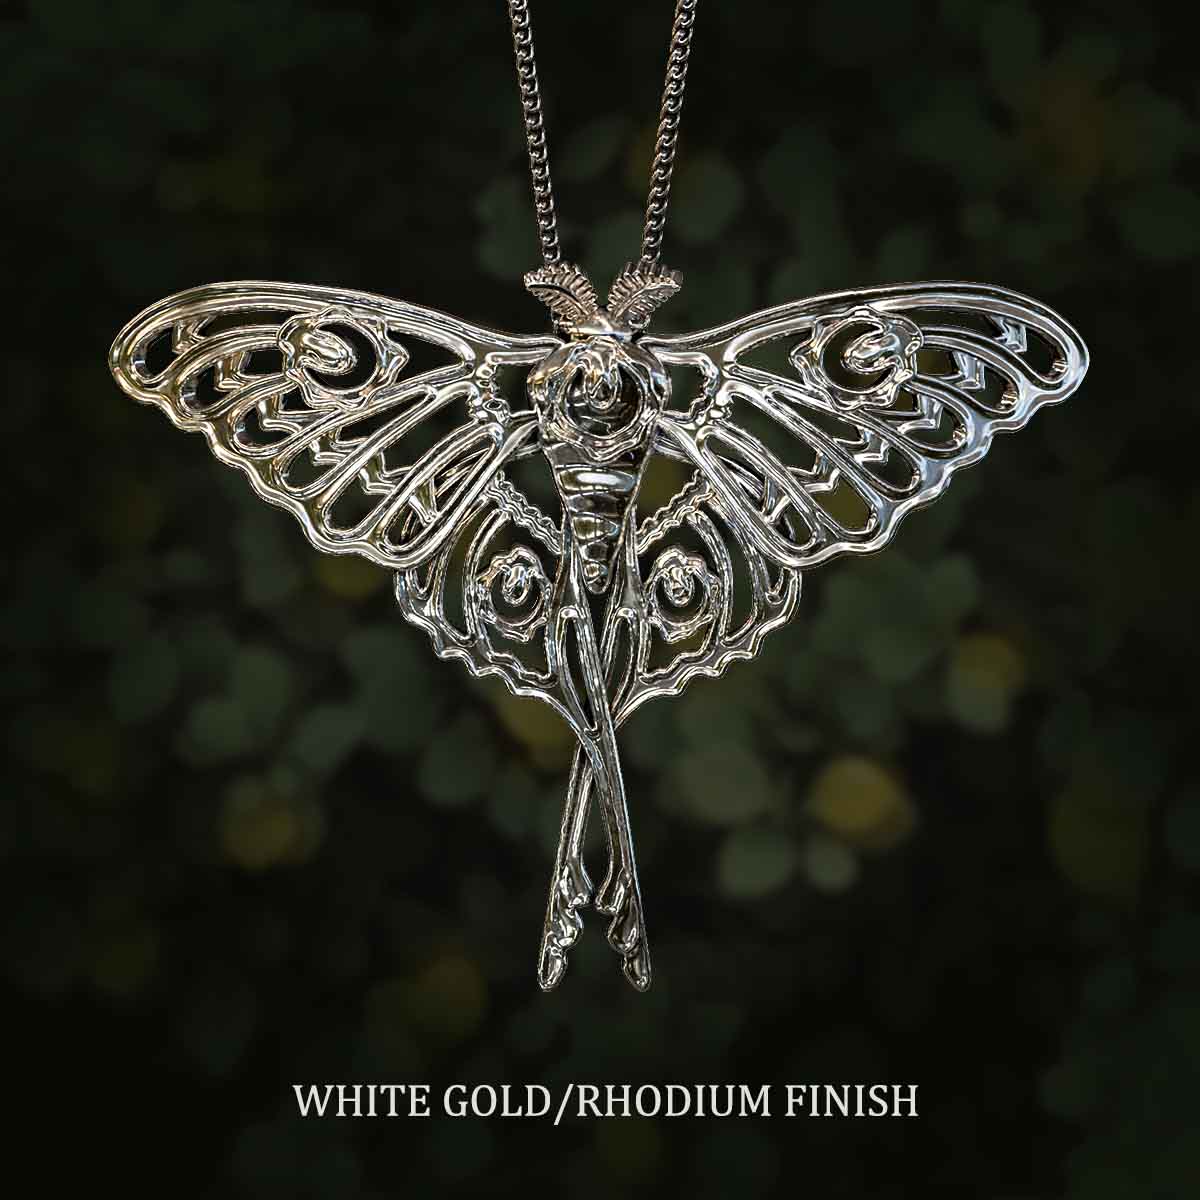 White-Gold-Rhodium-Finish-Comet-Moth-Pendant-Jewelry-For-Necklace